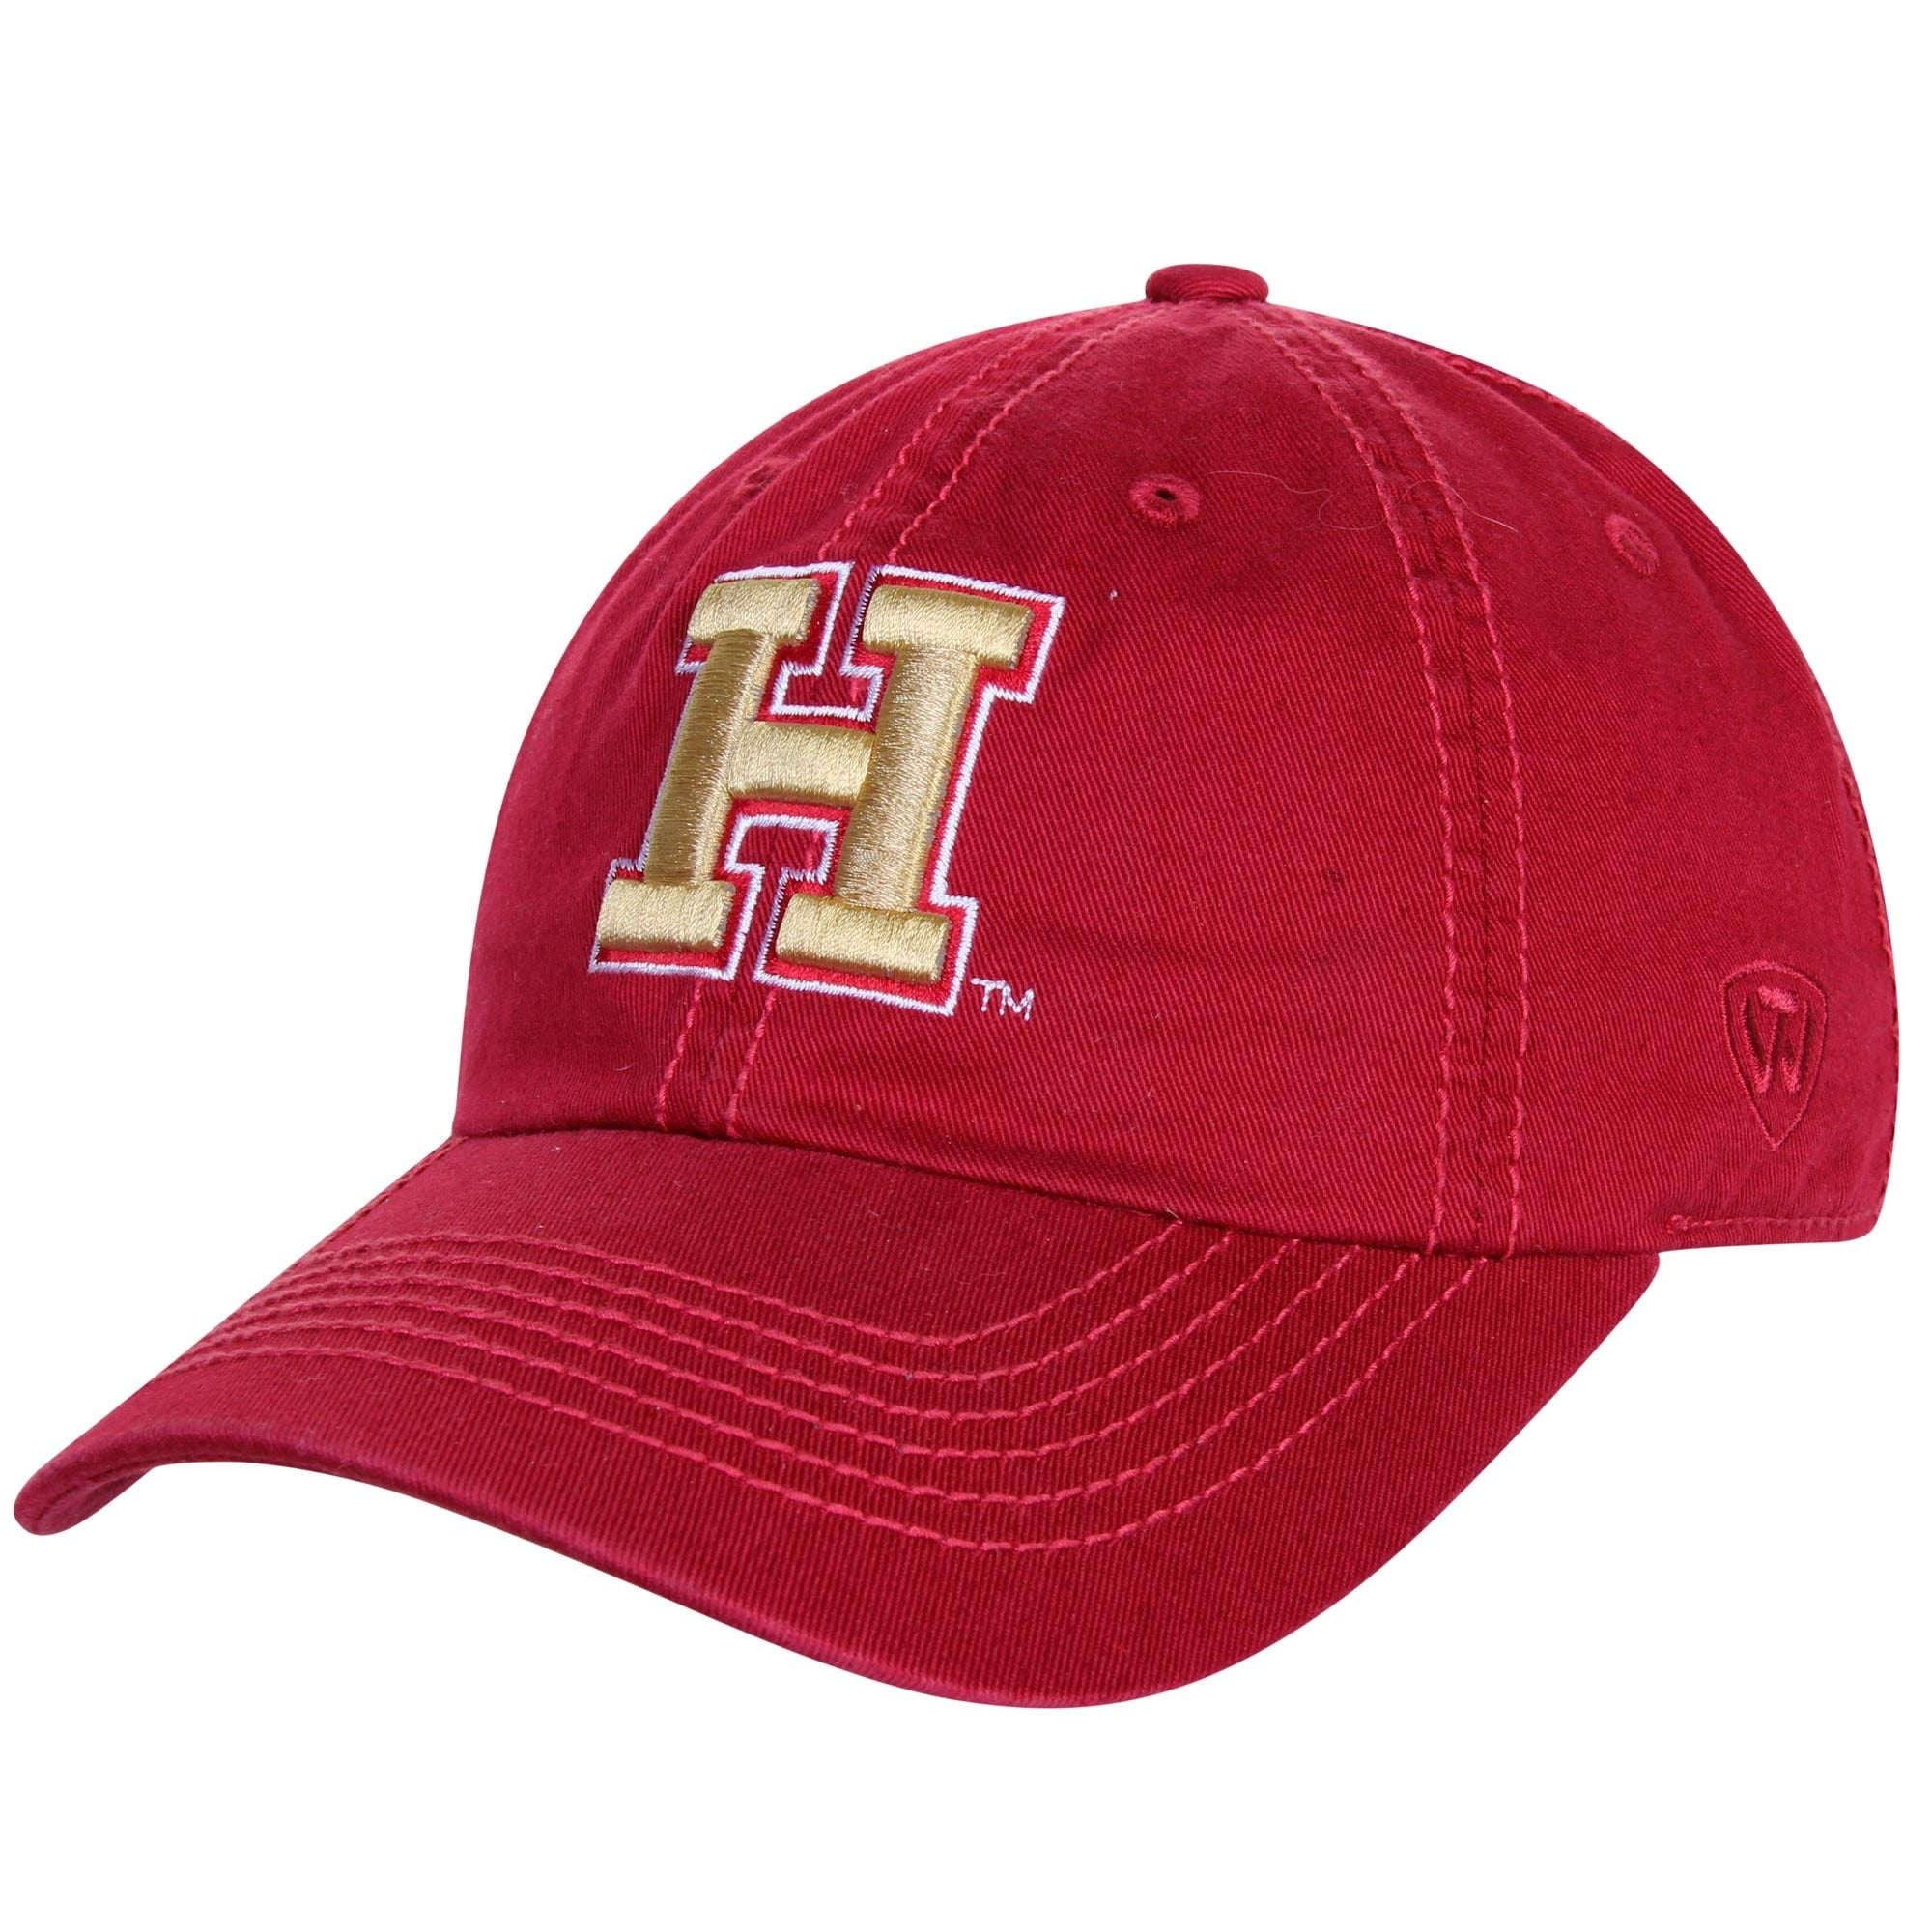 Harvard Crimson NCAA Adult Relaxed Fit University Meshback Hat Team Color